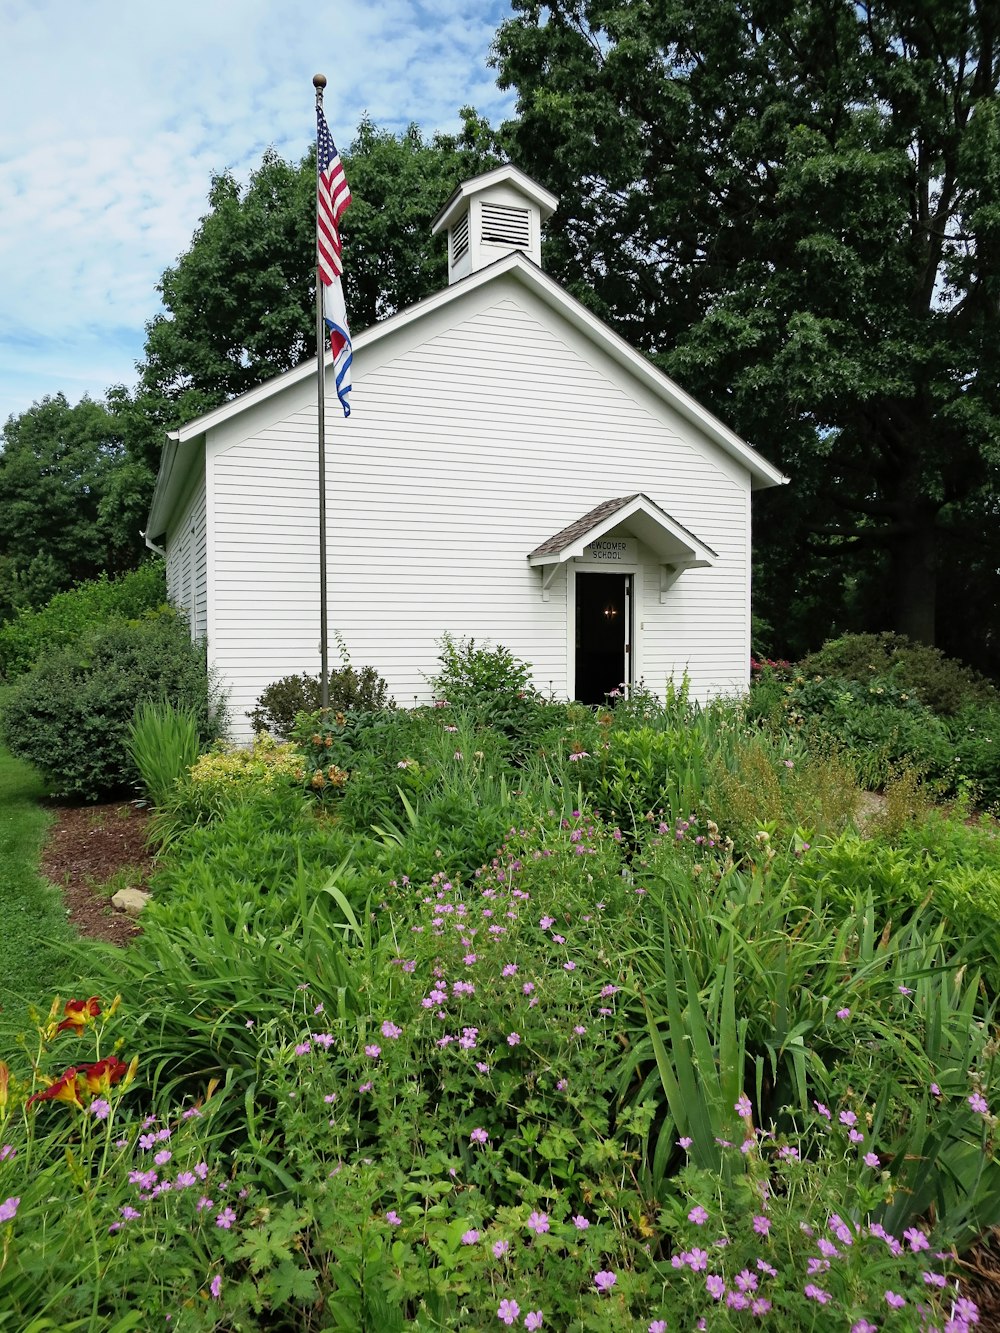 a small white church with a flag on top of it